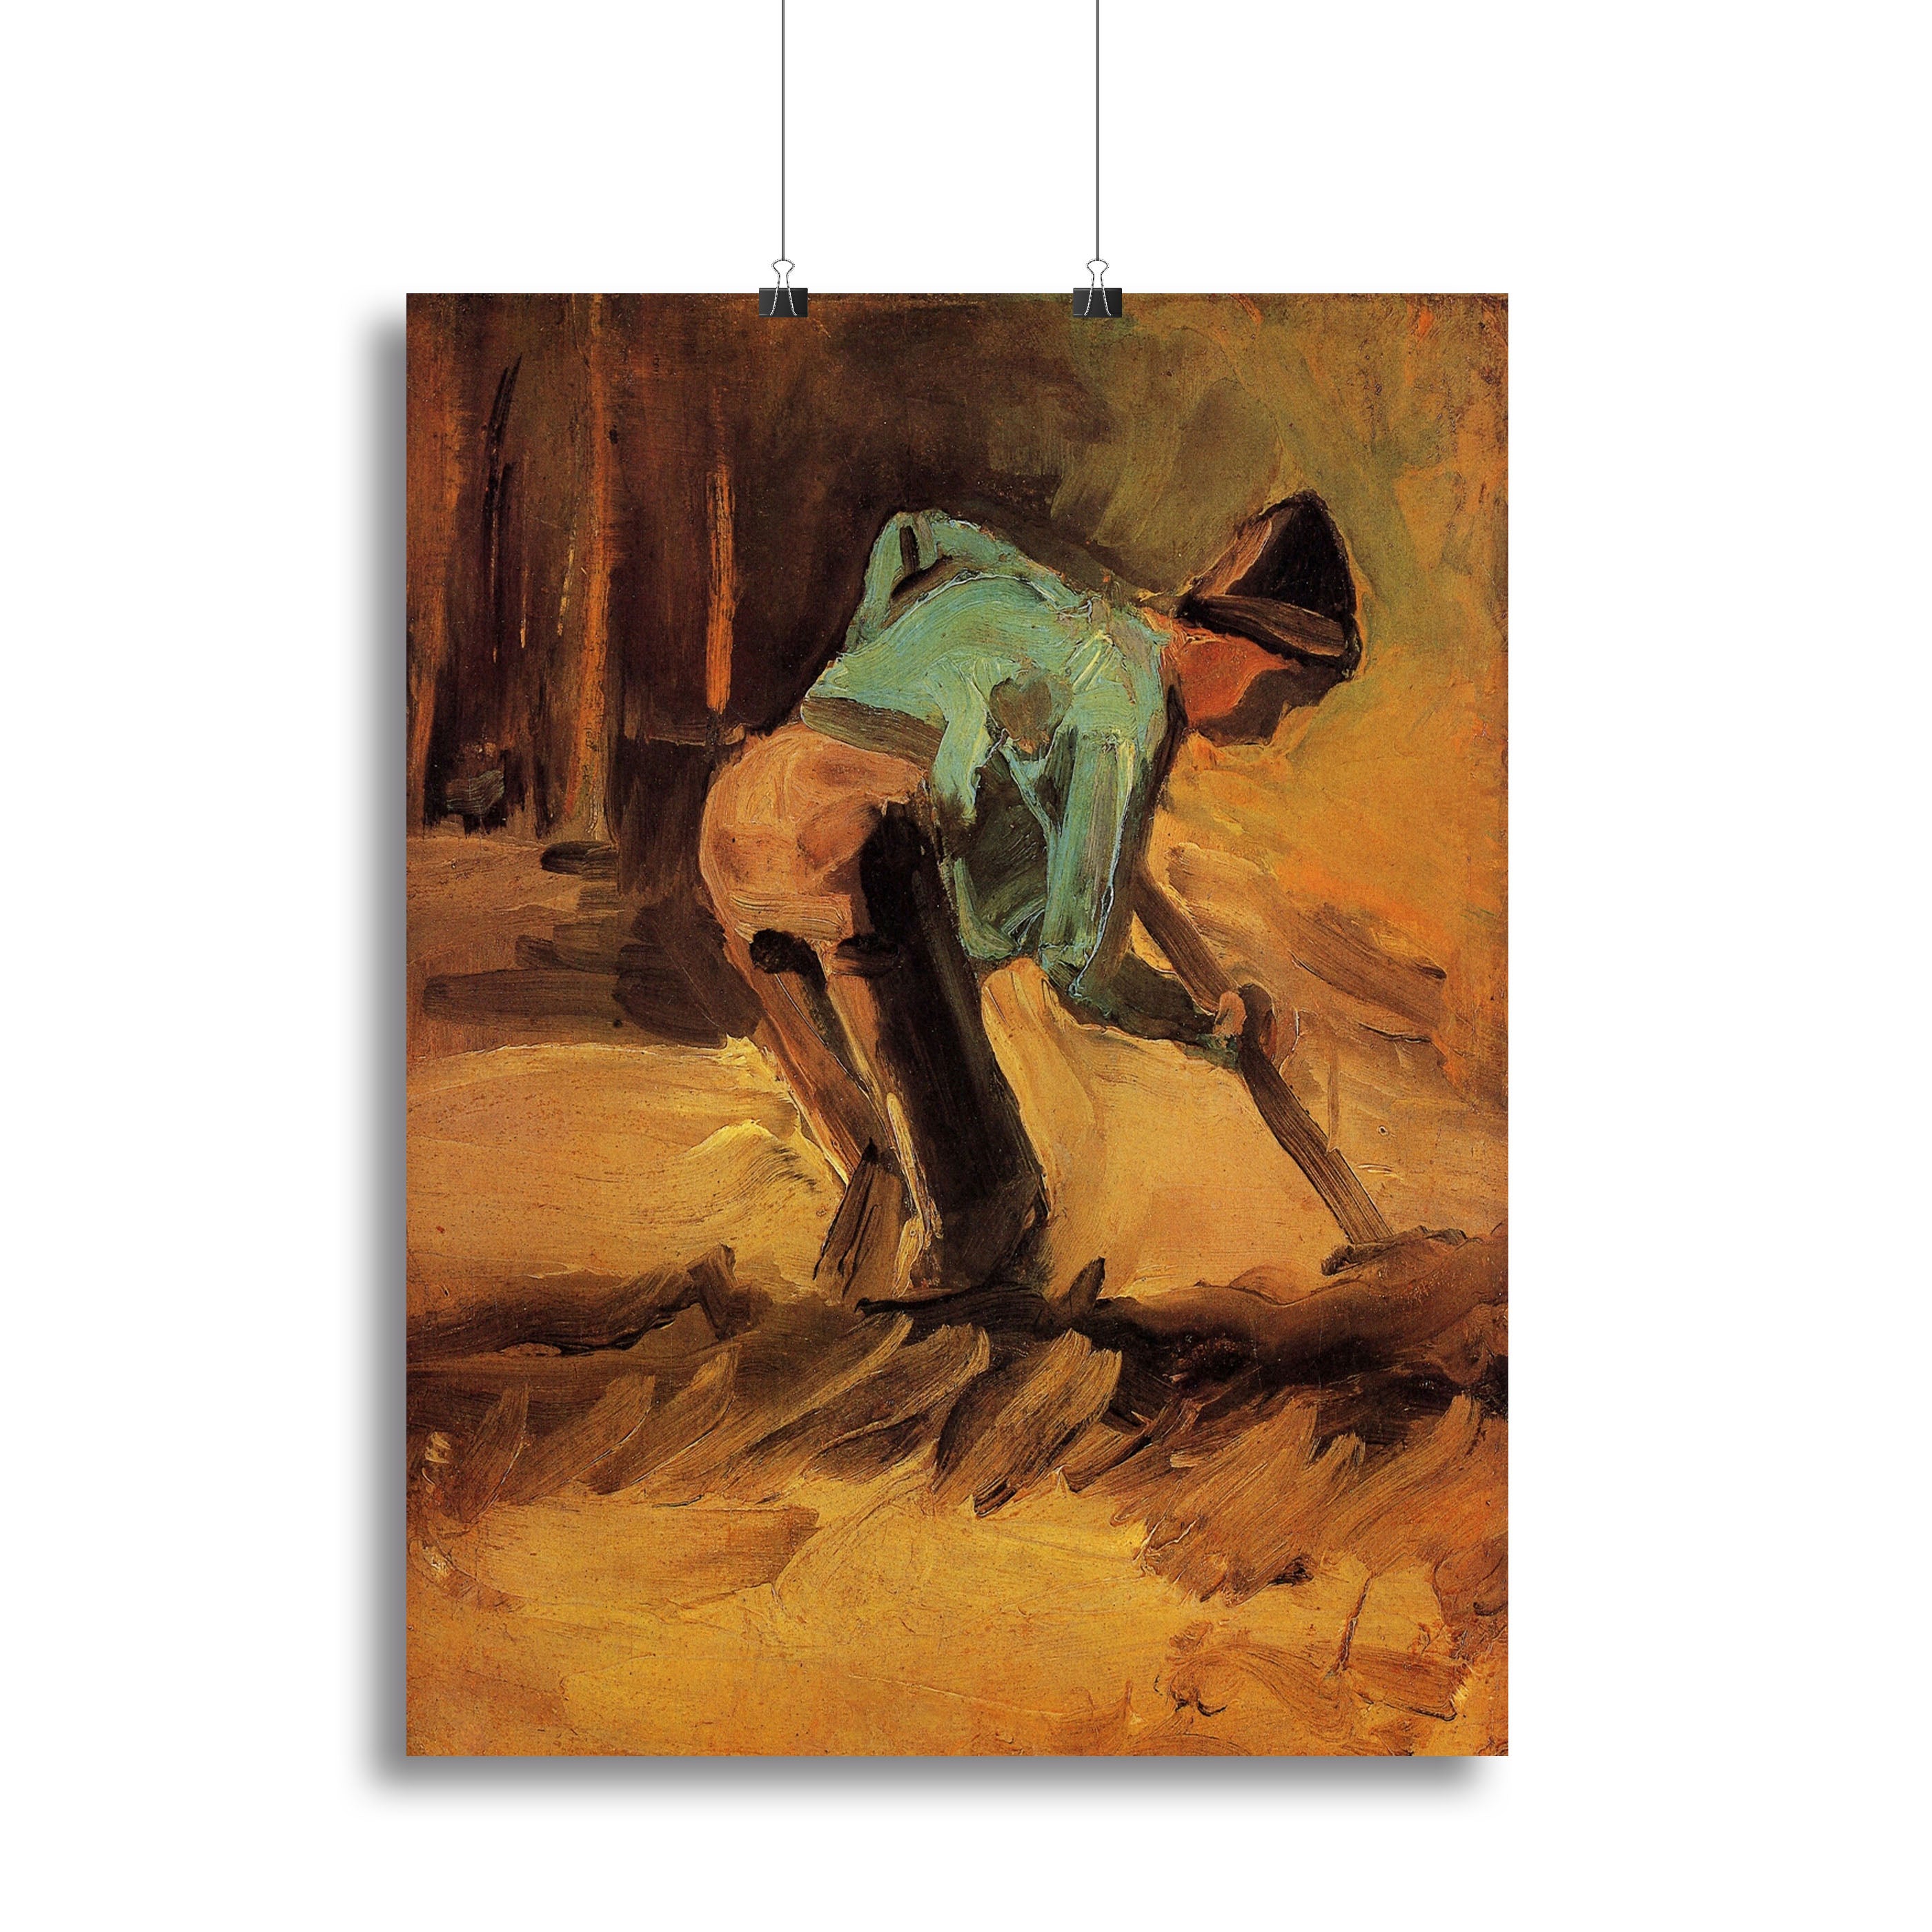 Man Stooping with Stick or Spade by Van Gogh Canvas Print or Poster - Canvas Art Rocks - 2